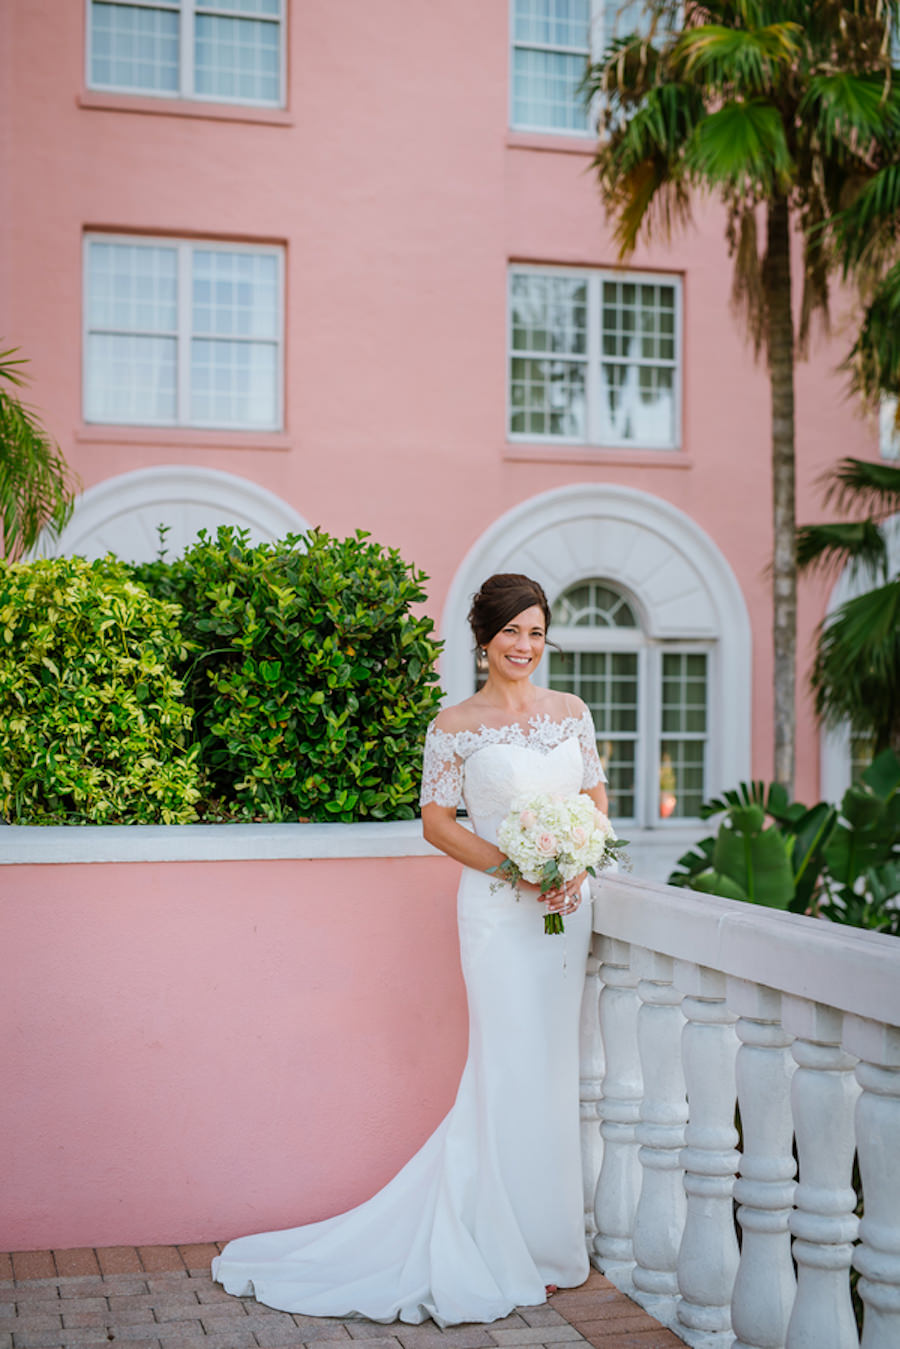 Outdoor, Bridal Wedding Portrait in Off the Shoulder, White, Lace Wedding Gown with Ivory and Pink Wedding Bouquet of Flowers | St. Pete Beach Hair and Makeup Lasting Luxe